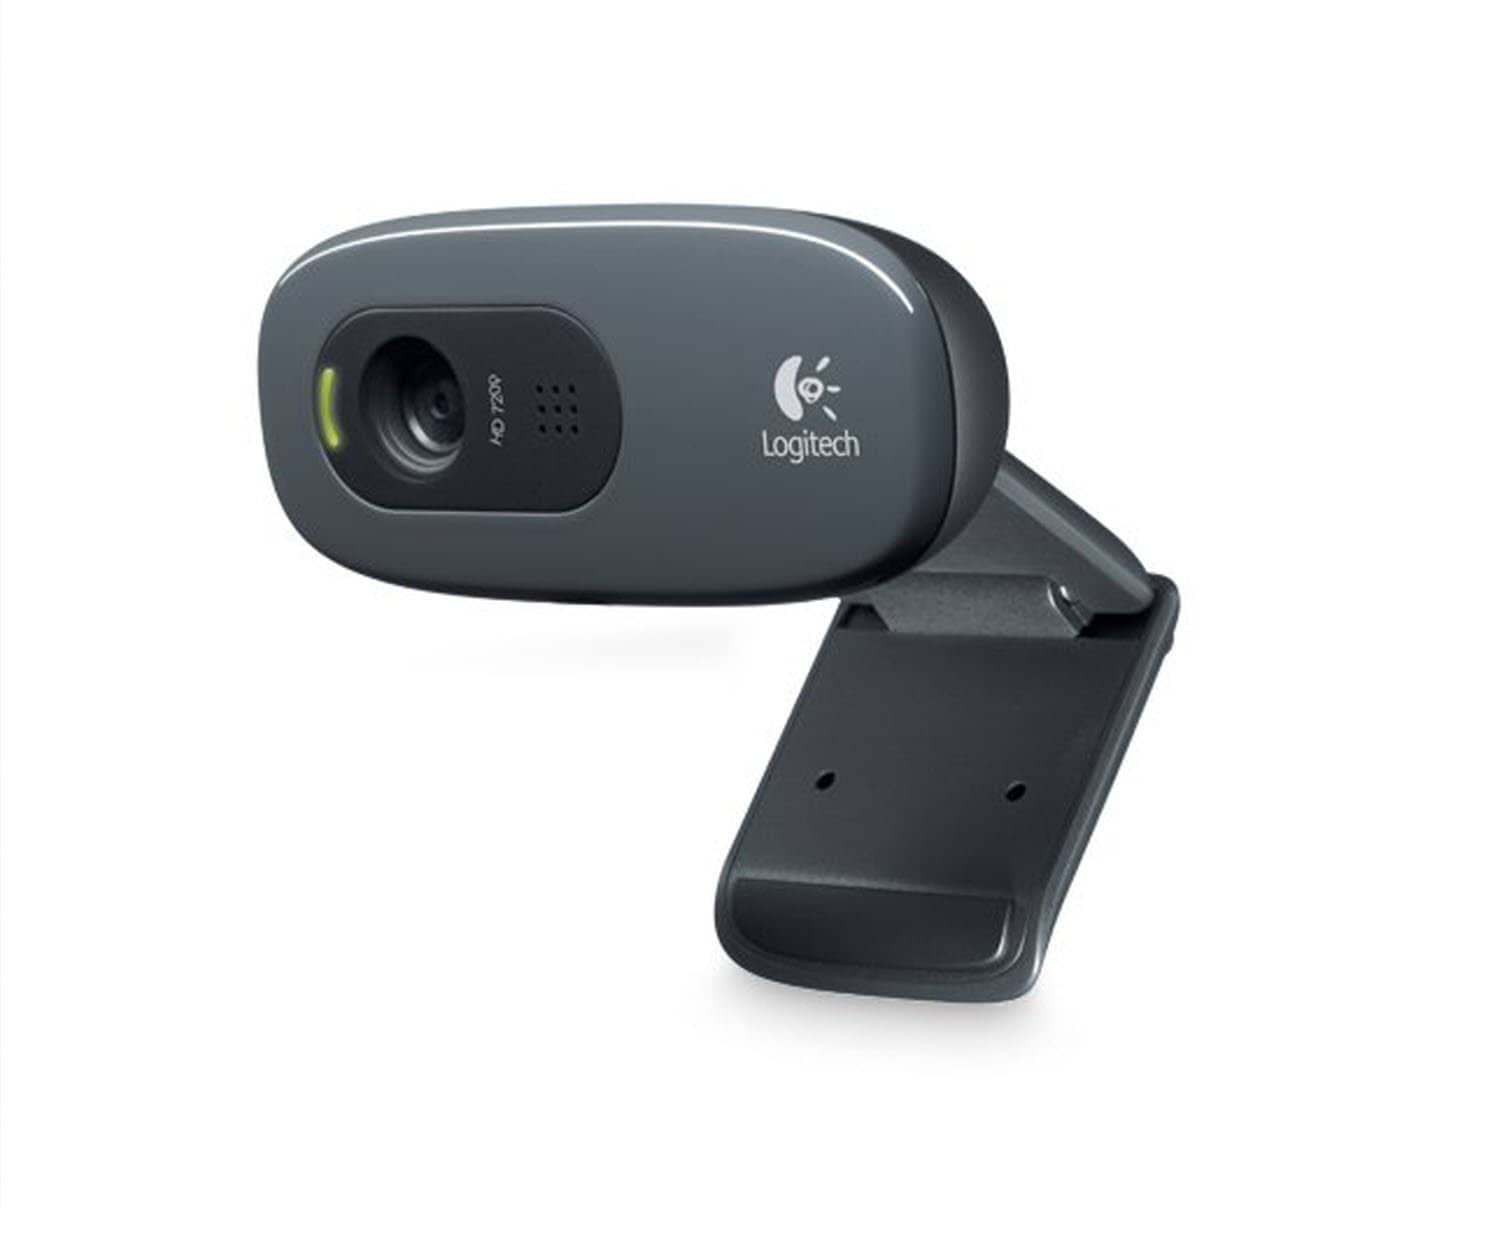 Logitech C270 Widescreen HD Webcam and 3 MP designed for HD Video Calling and Recording